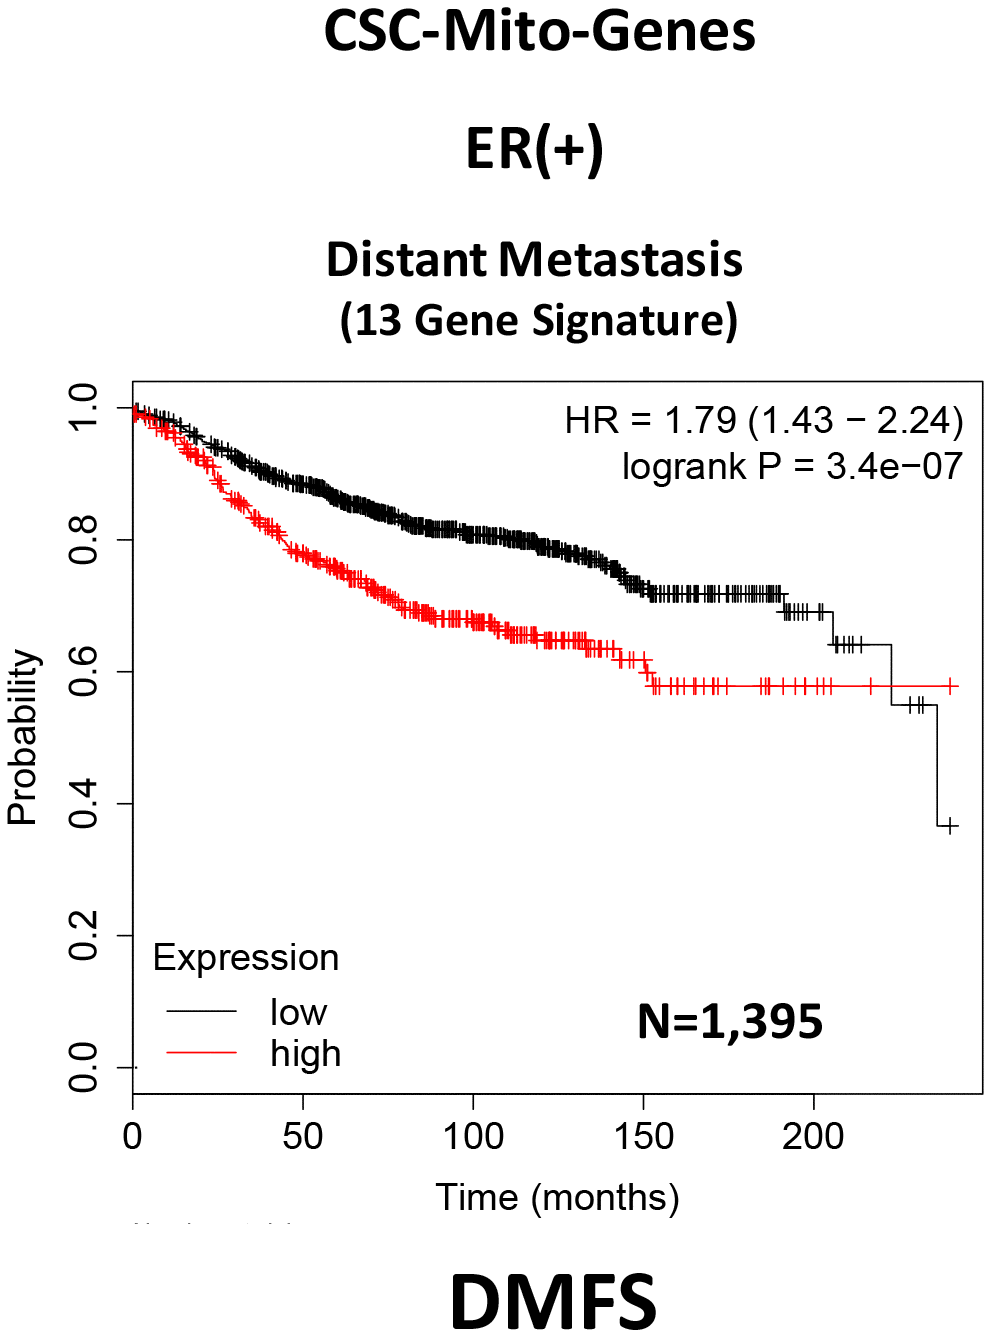 A CSC-based mitochondrial 13-gene signature predicts distant metastasis in ER(+) breast cancer patients. We used 13 gene transcripts to create a CSC-based mitochondrial-related gene signature, that effectively predicted distant metastasis in N=1,395 patients (HR=1.79; P=3.4e-07). See also Supplementary Table 1.